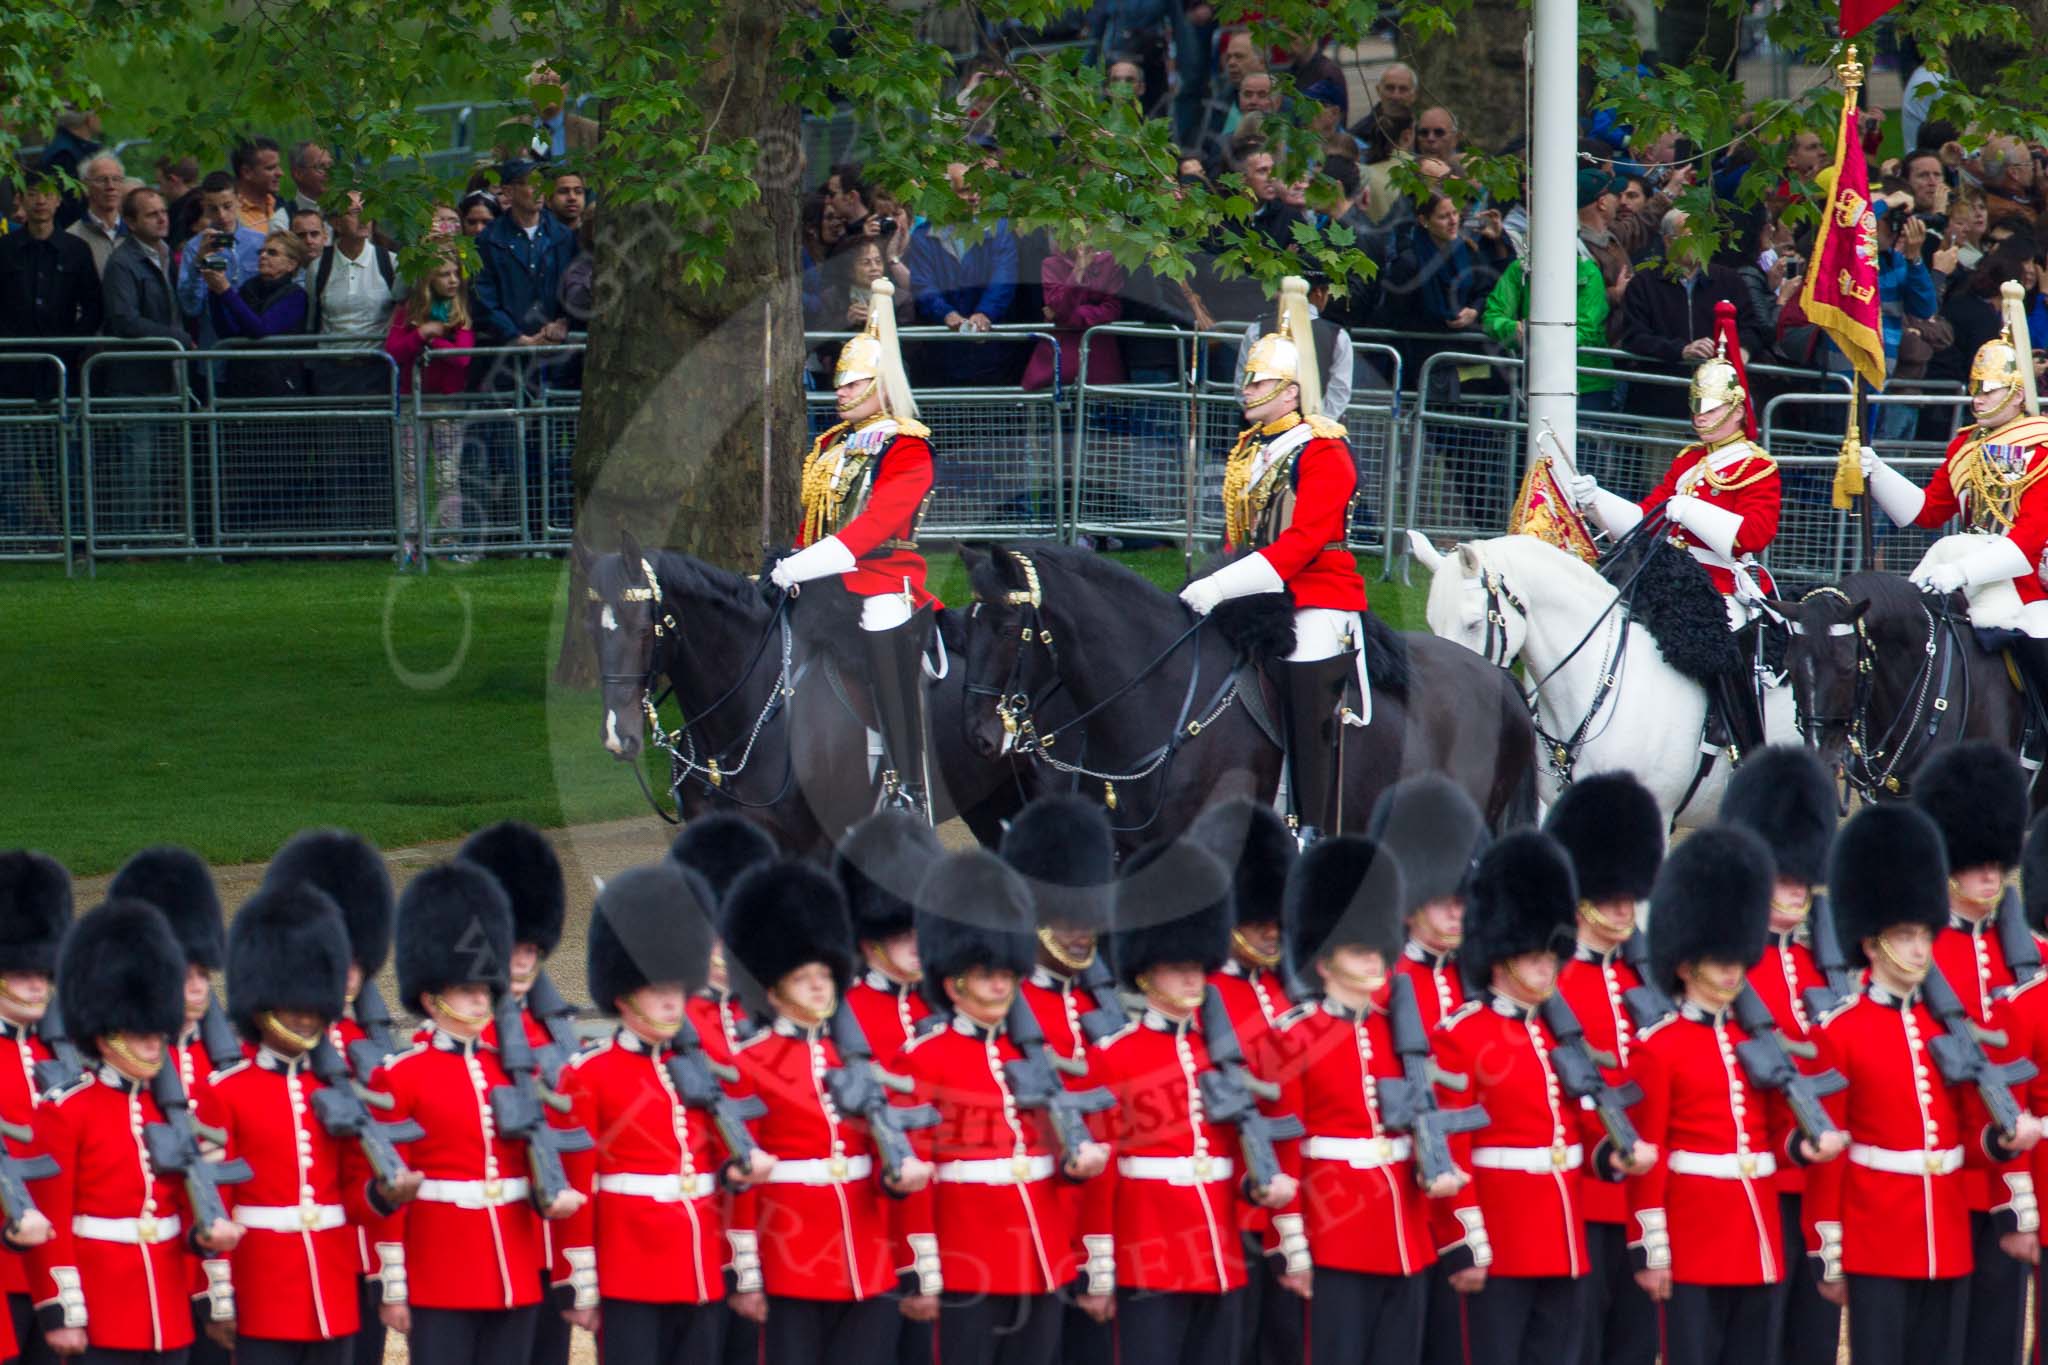 Major General's Review 2013: The First and Second Division of the Sovereign's Escort, The Life Guards..
Horse Guards Parade, Westminster,
London SW1,

United Kingdom,
on 01 June 2013 at 10:59, image #242